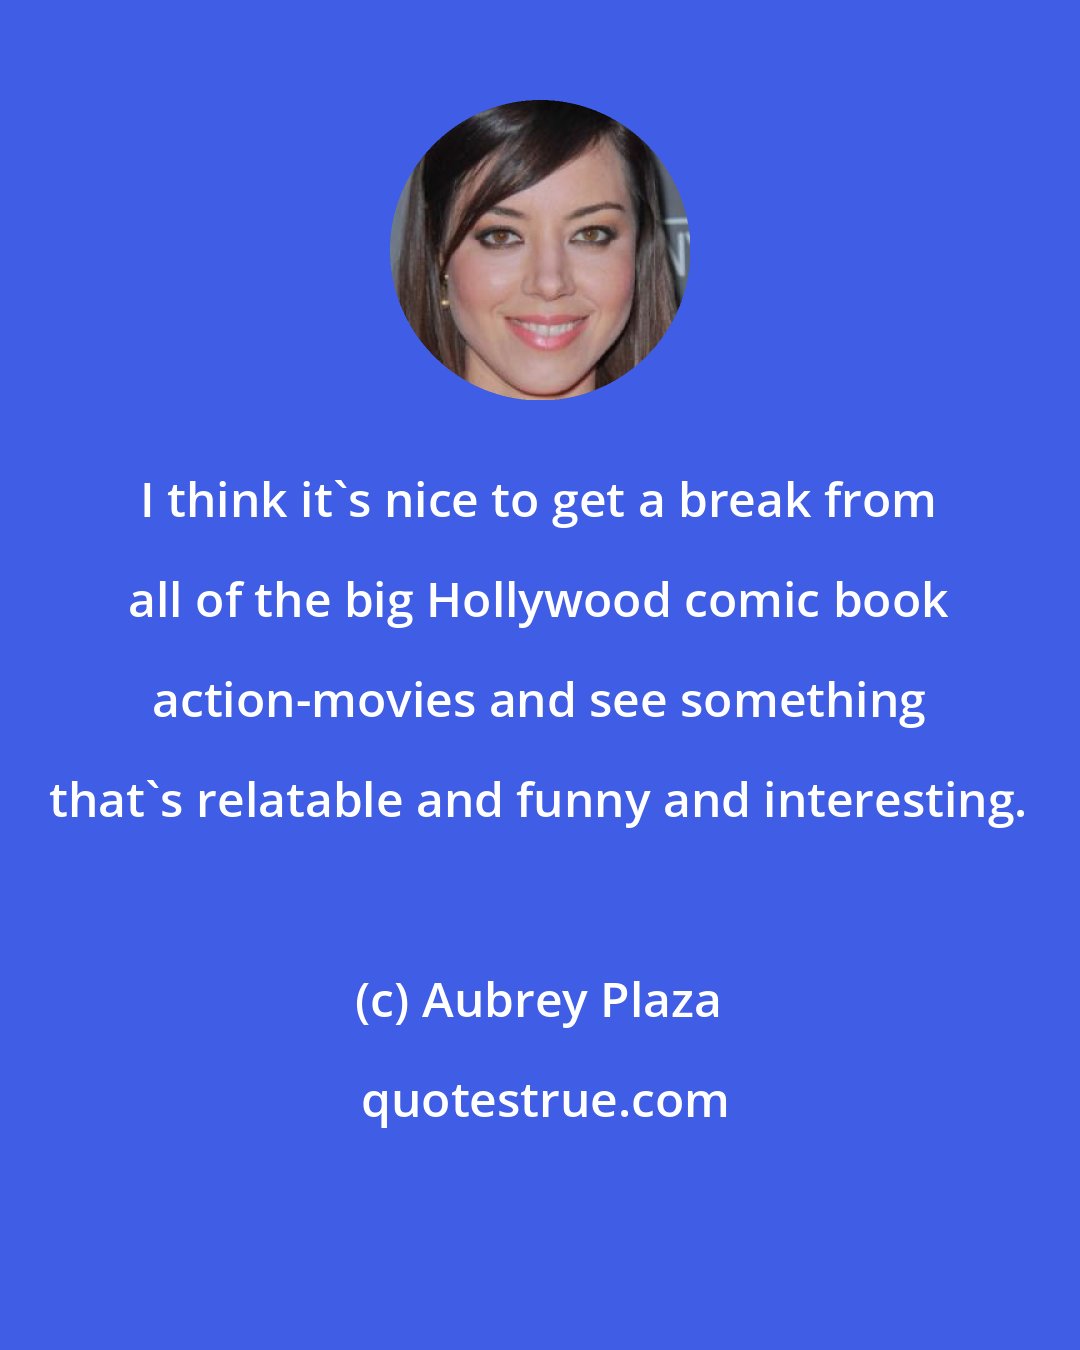 Aubrey Plaza: I think it's nice to get a break from all of the big Hollywood comic book action-movies and see something that's relatable and funny and interesting.